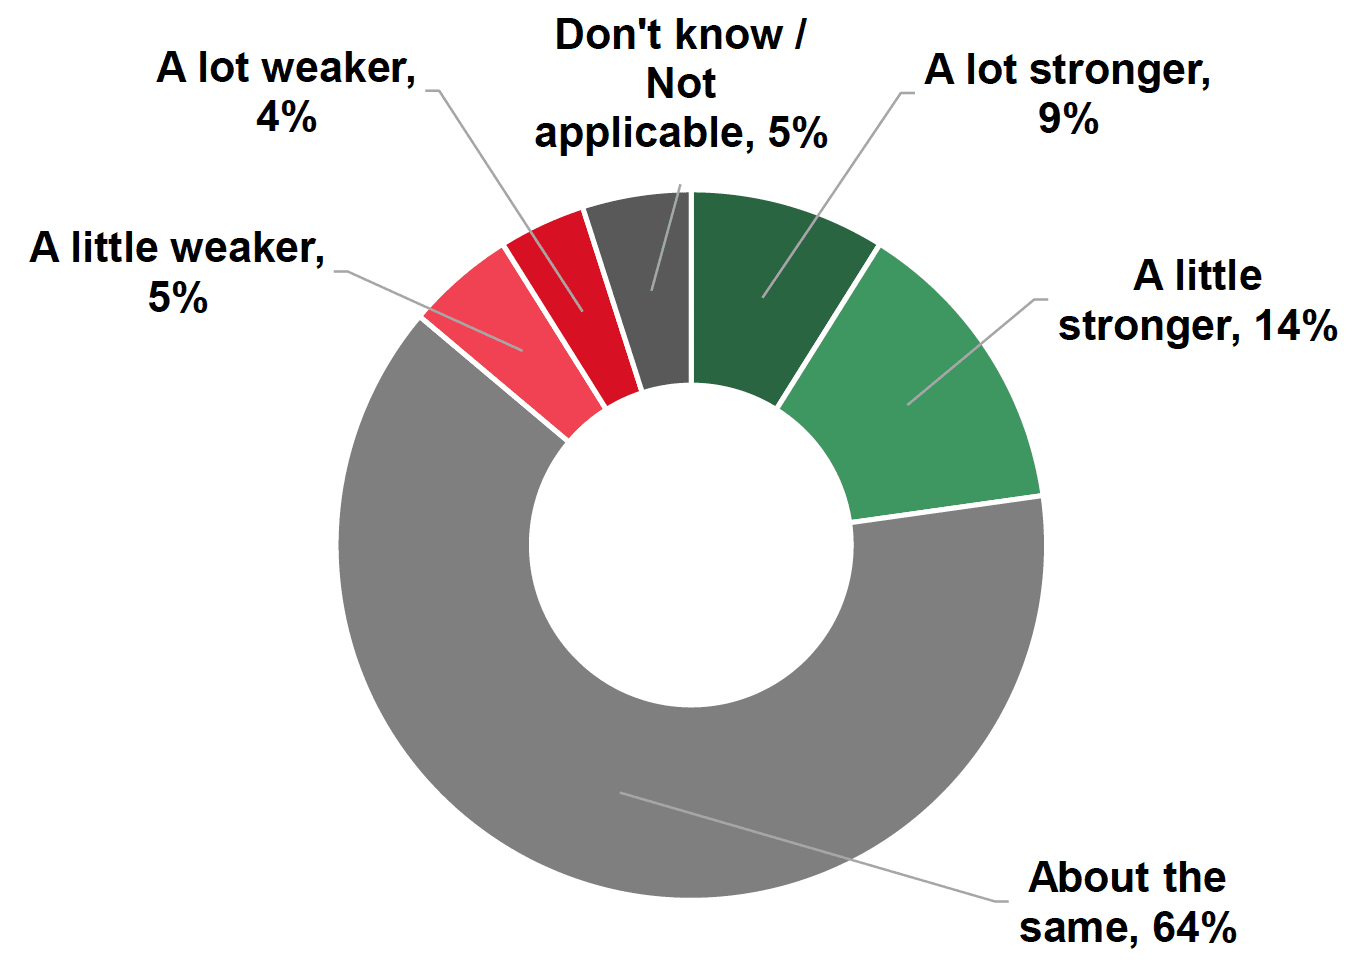 Pie chart showing that 22% say their relationships with neighbours are stronger, 9% weaker and 64% about the same